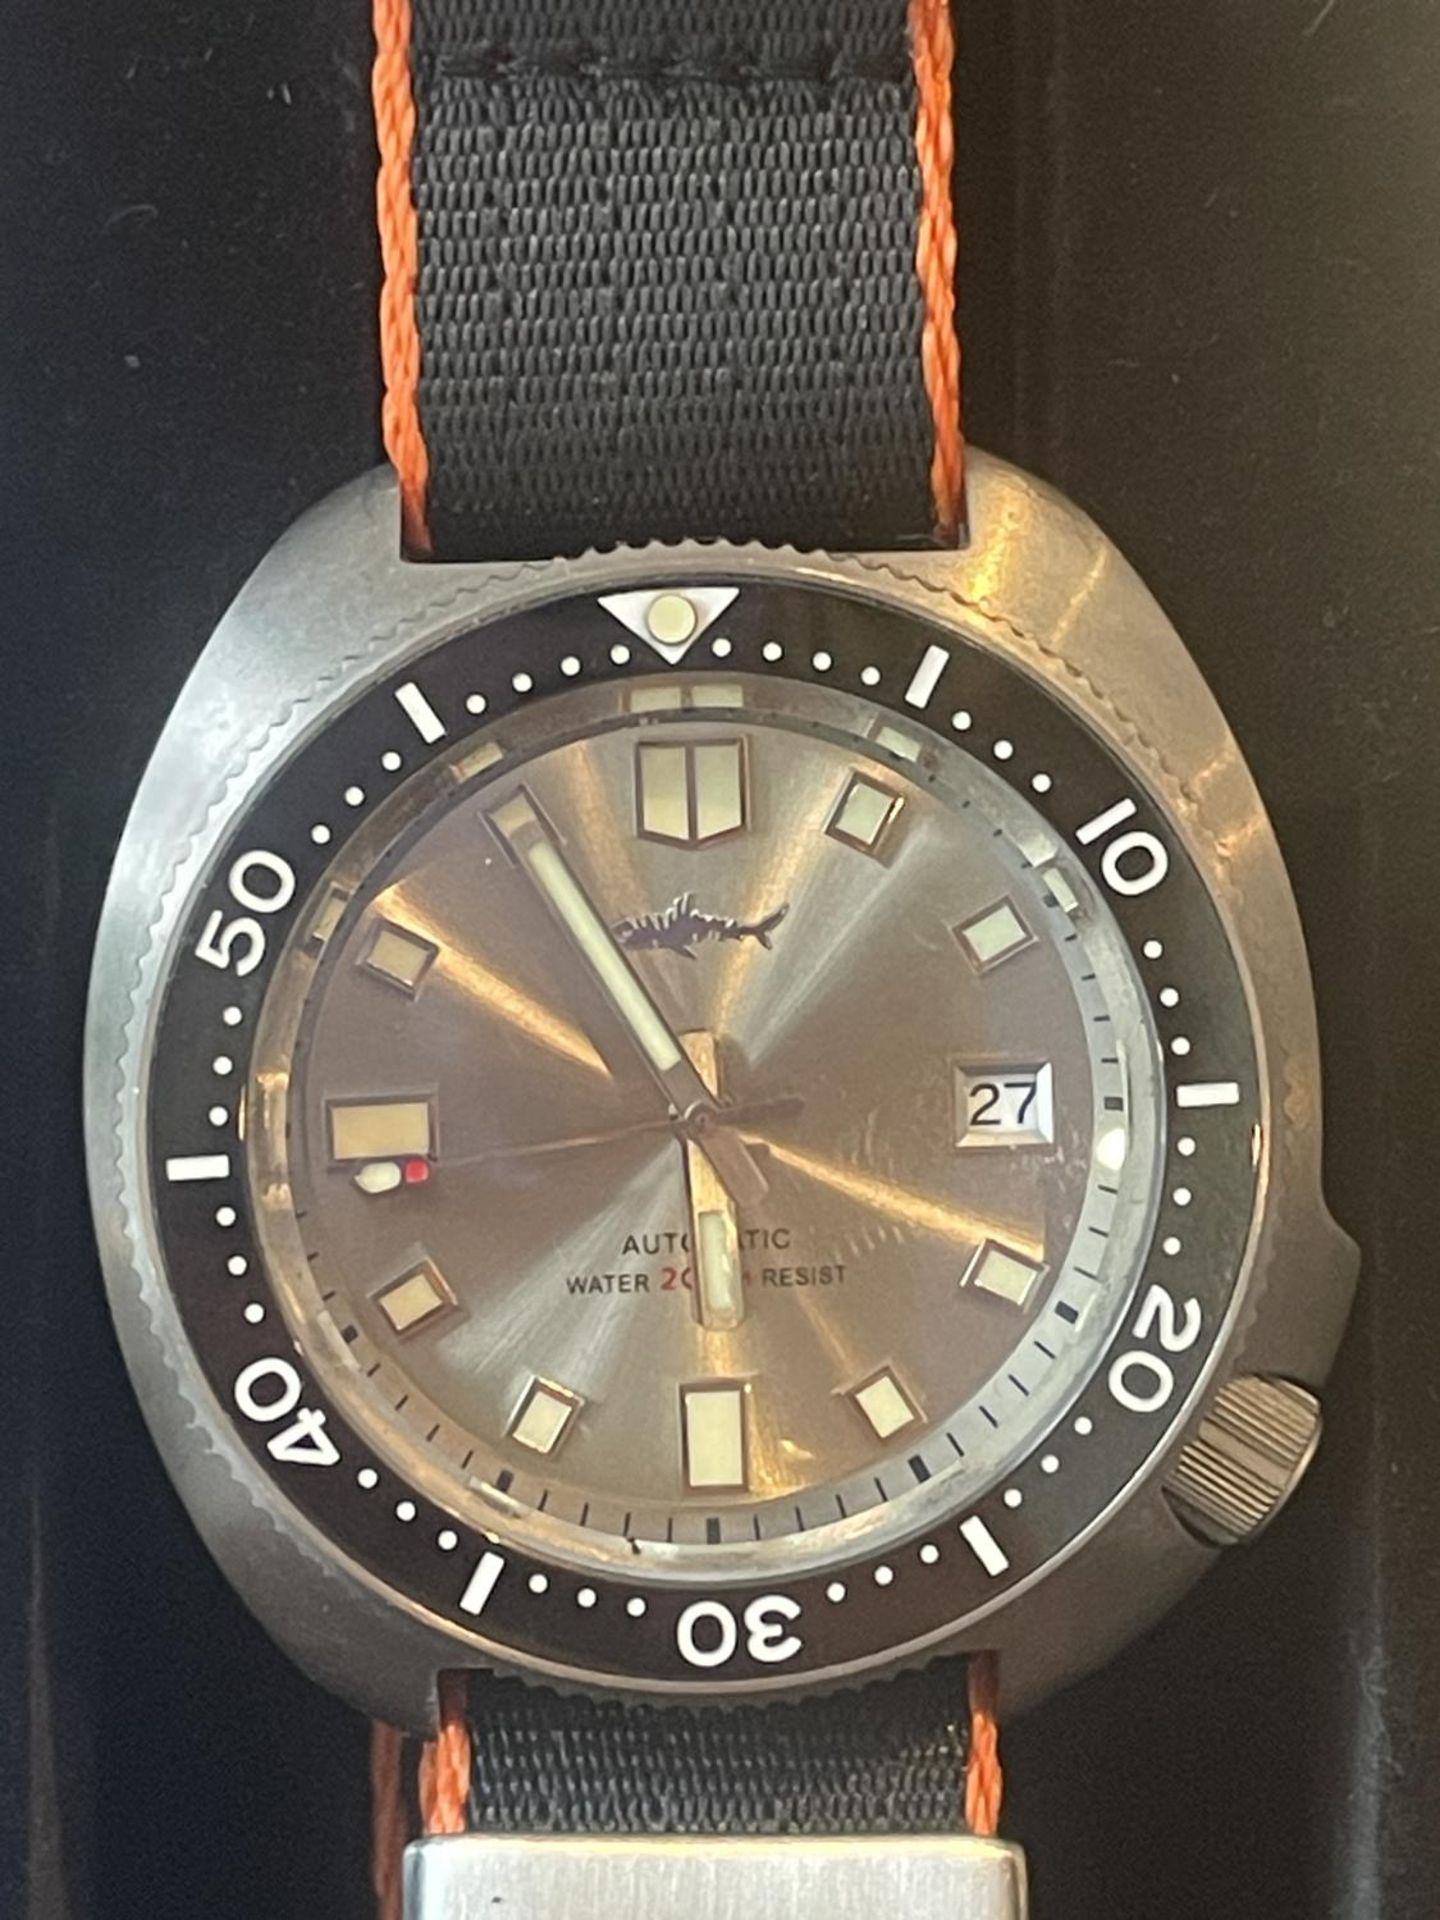 A HEIMDALLR DIVERS WRIST WATCH IN A PRESENTATION BOX SEEN WORKING BUT NO WARRANTY - Image 2 of 4